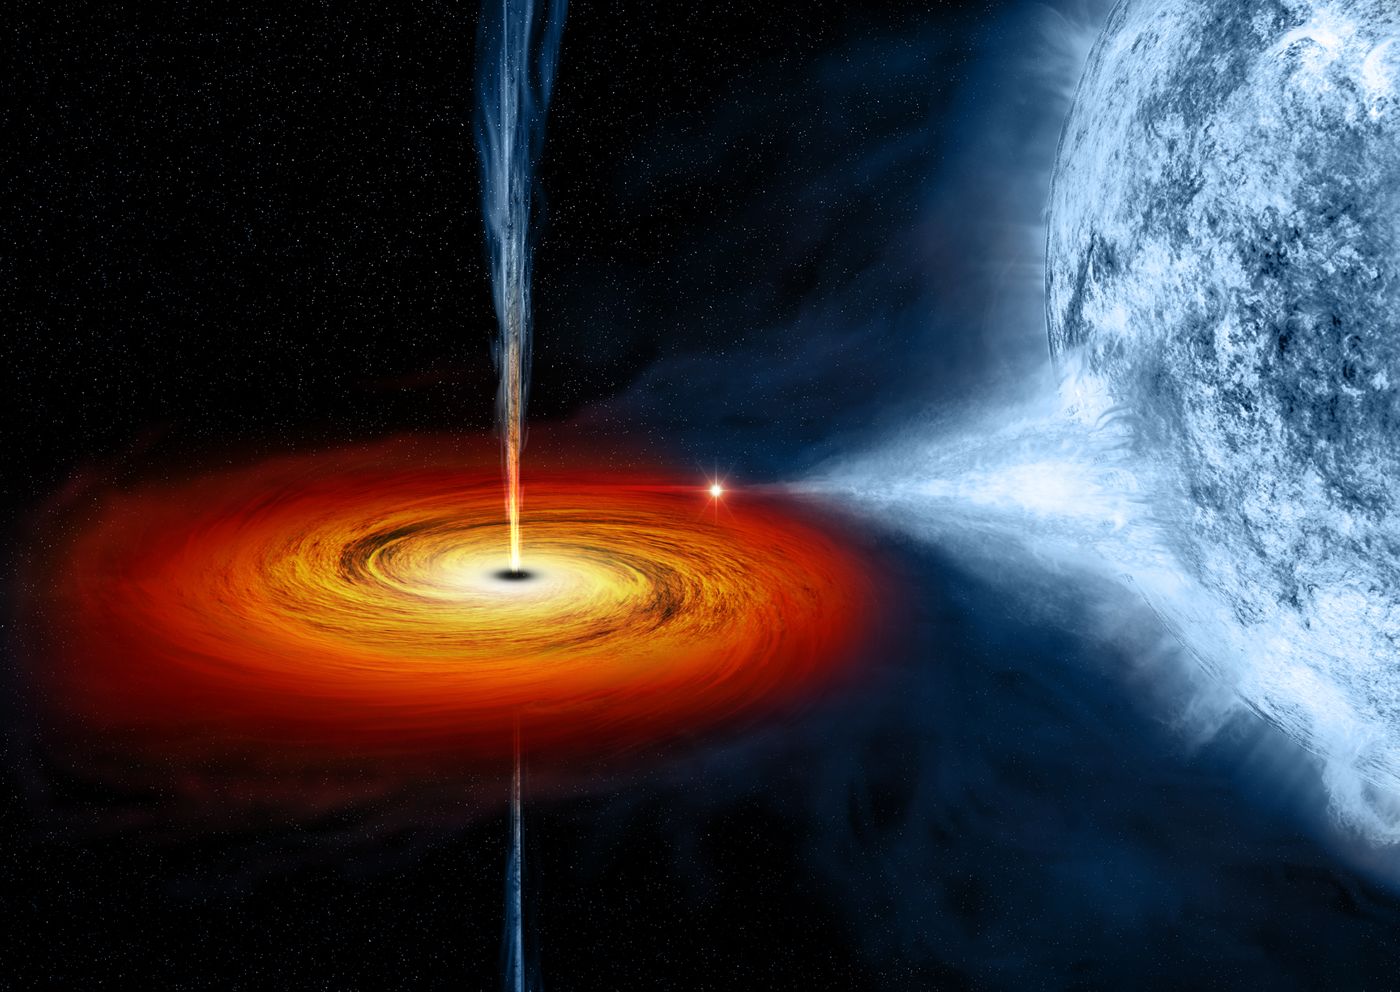 An artist's impression of a black hole eating its neighboring star in a binary system.